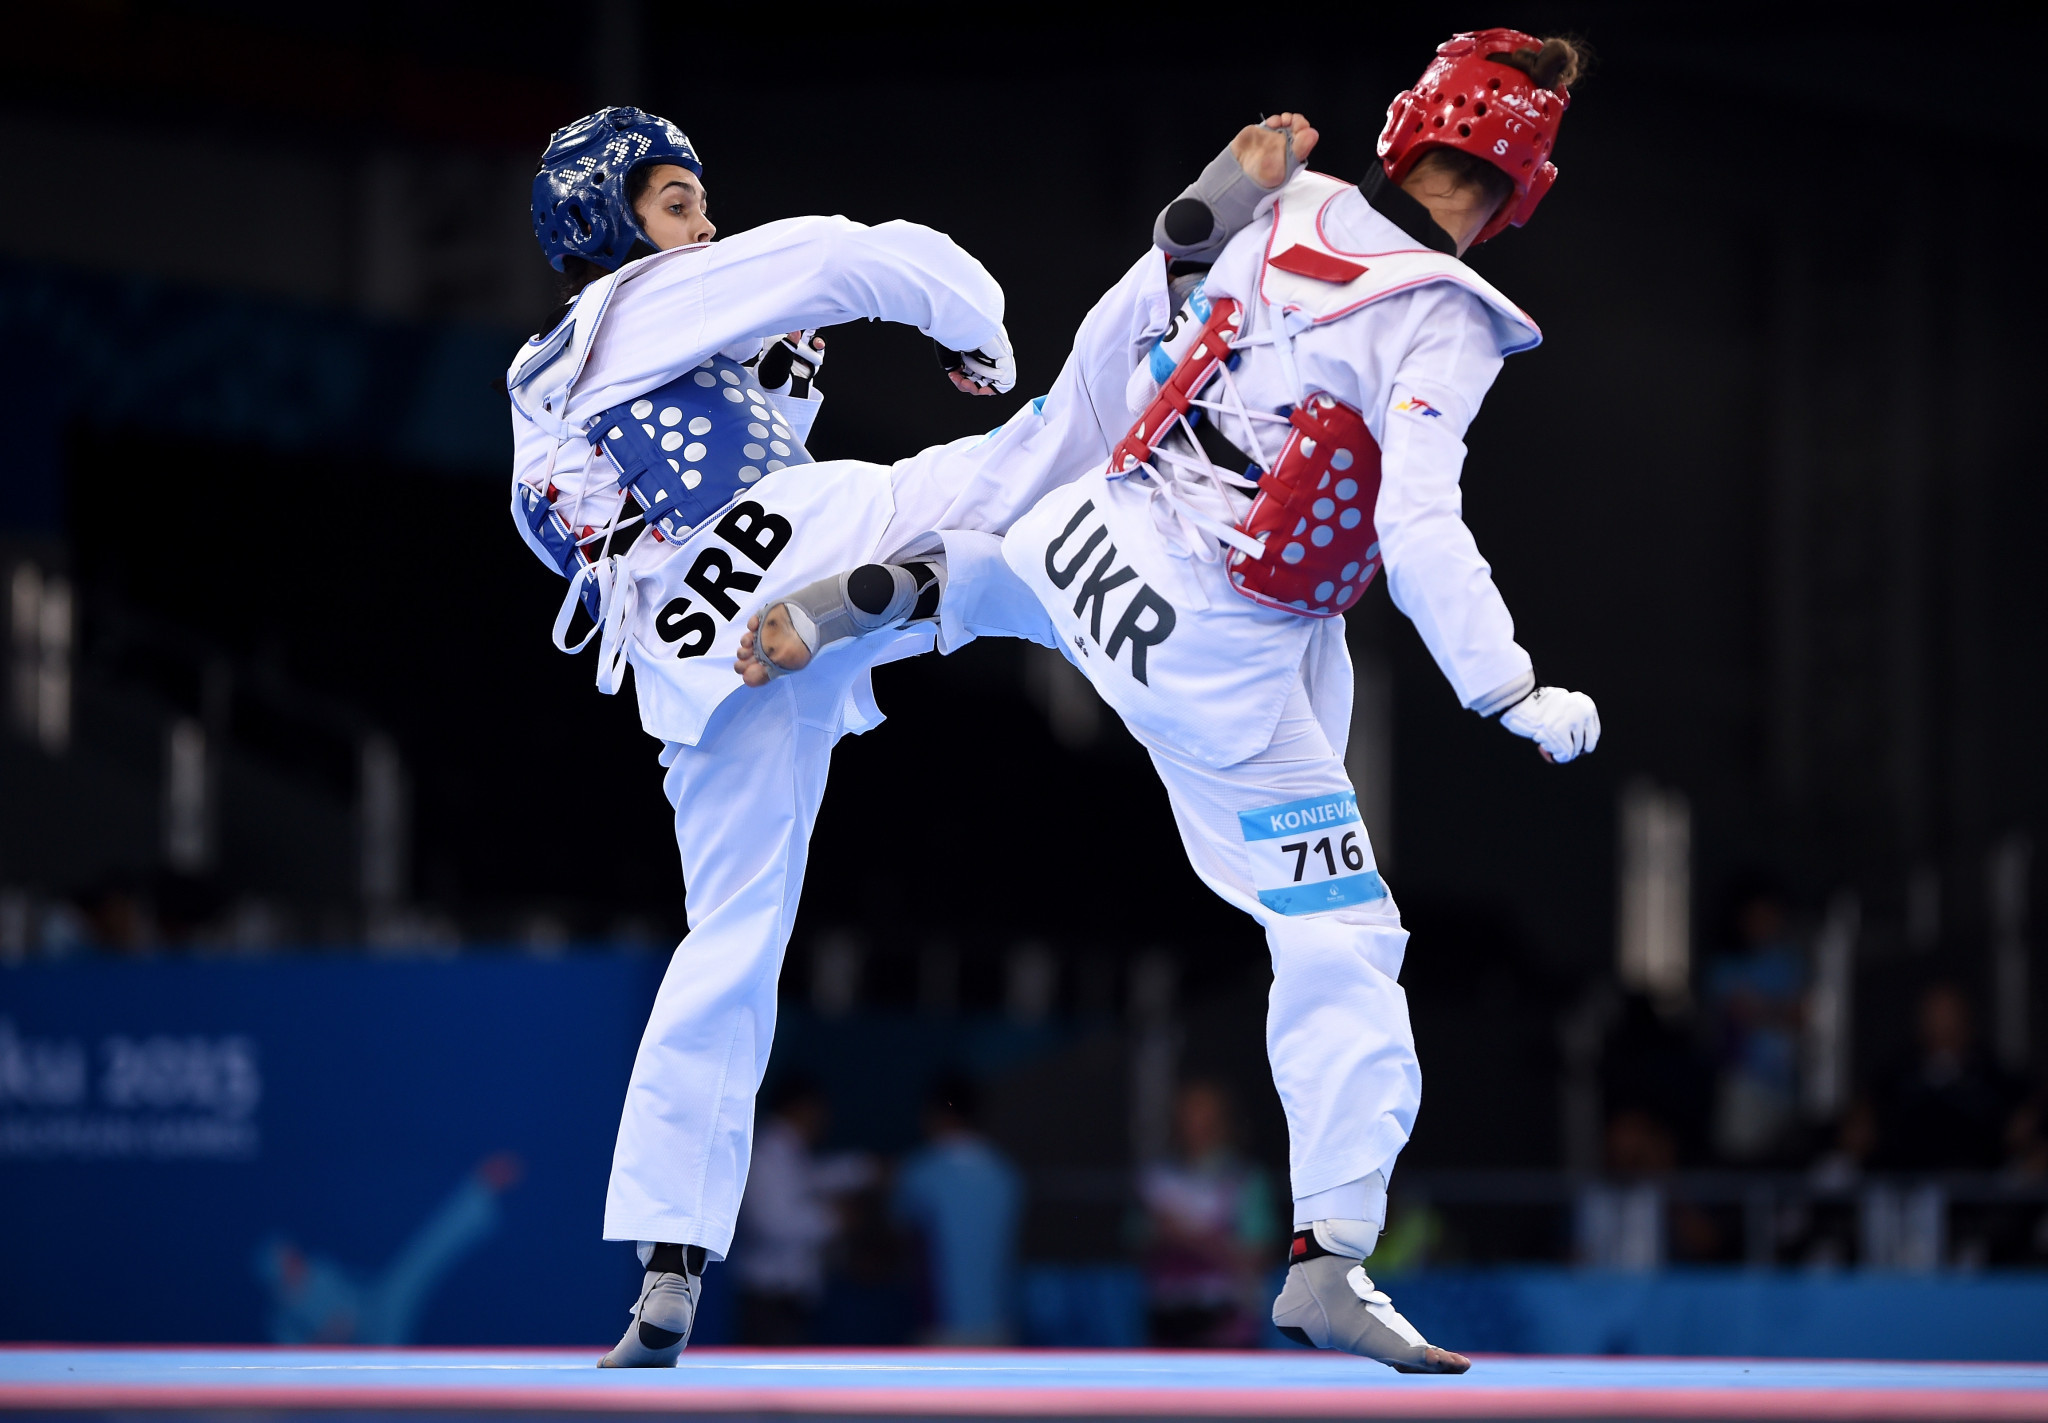 Ukraine has boycotted the World Taekwondo Championships because Russian and Belarusian athletes are participating as neutrals ©Getty Images